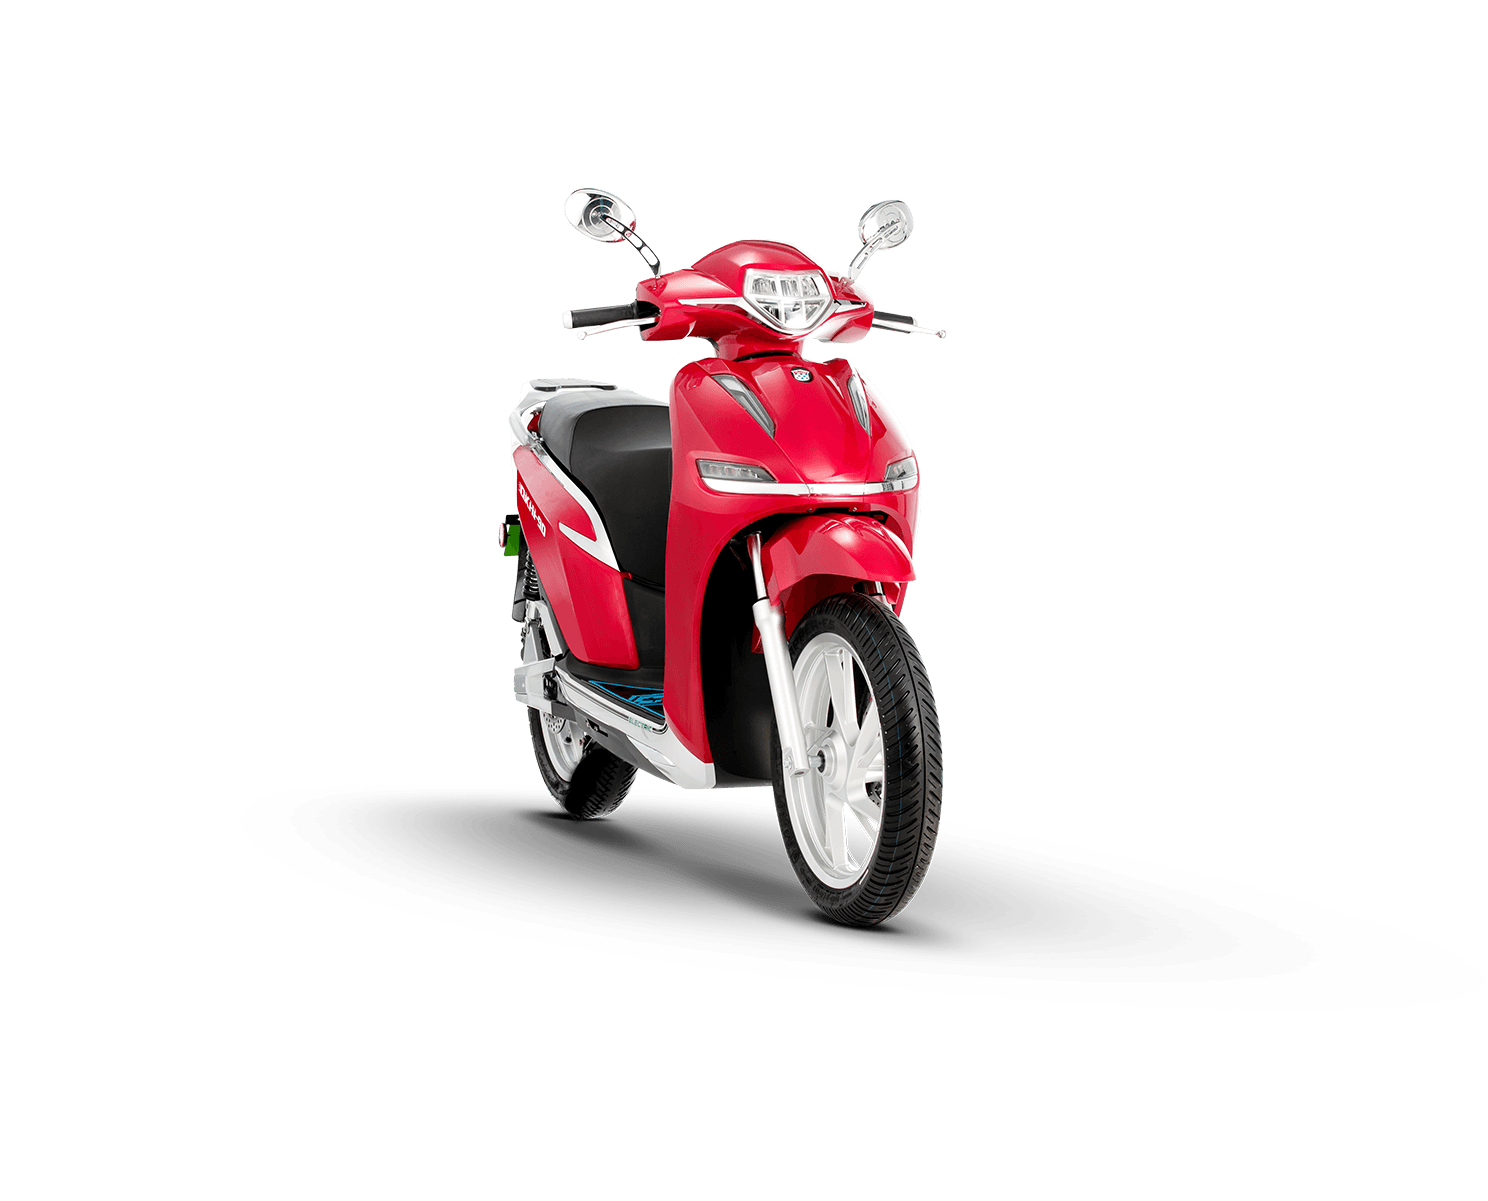 Okinawa Okhi-90 Updated For 2023; Priced At Rs. 1.86 lakh